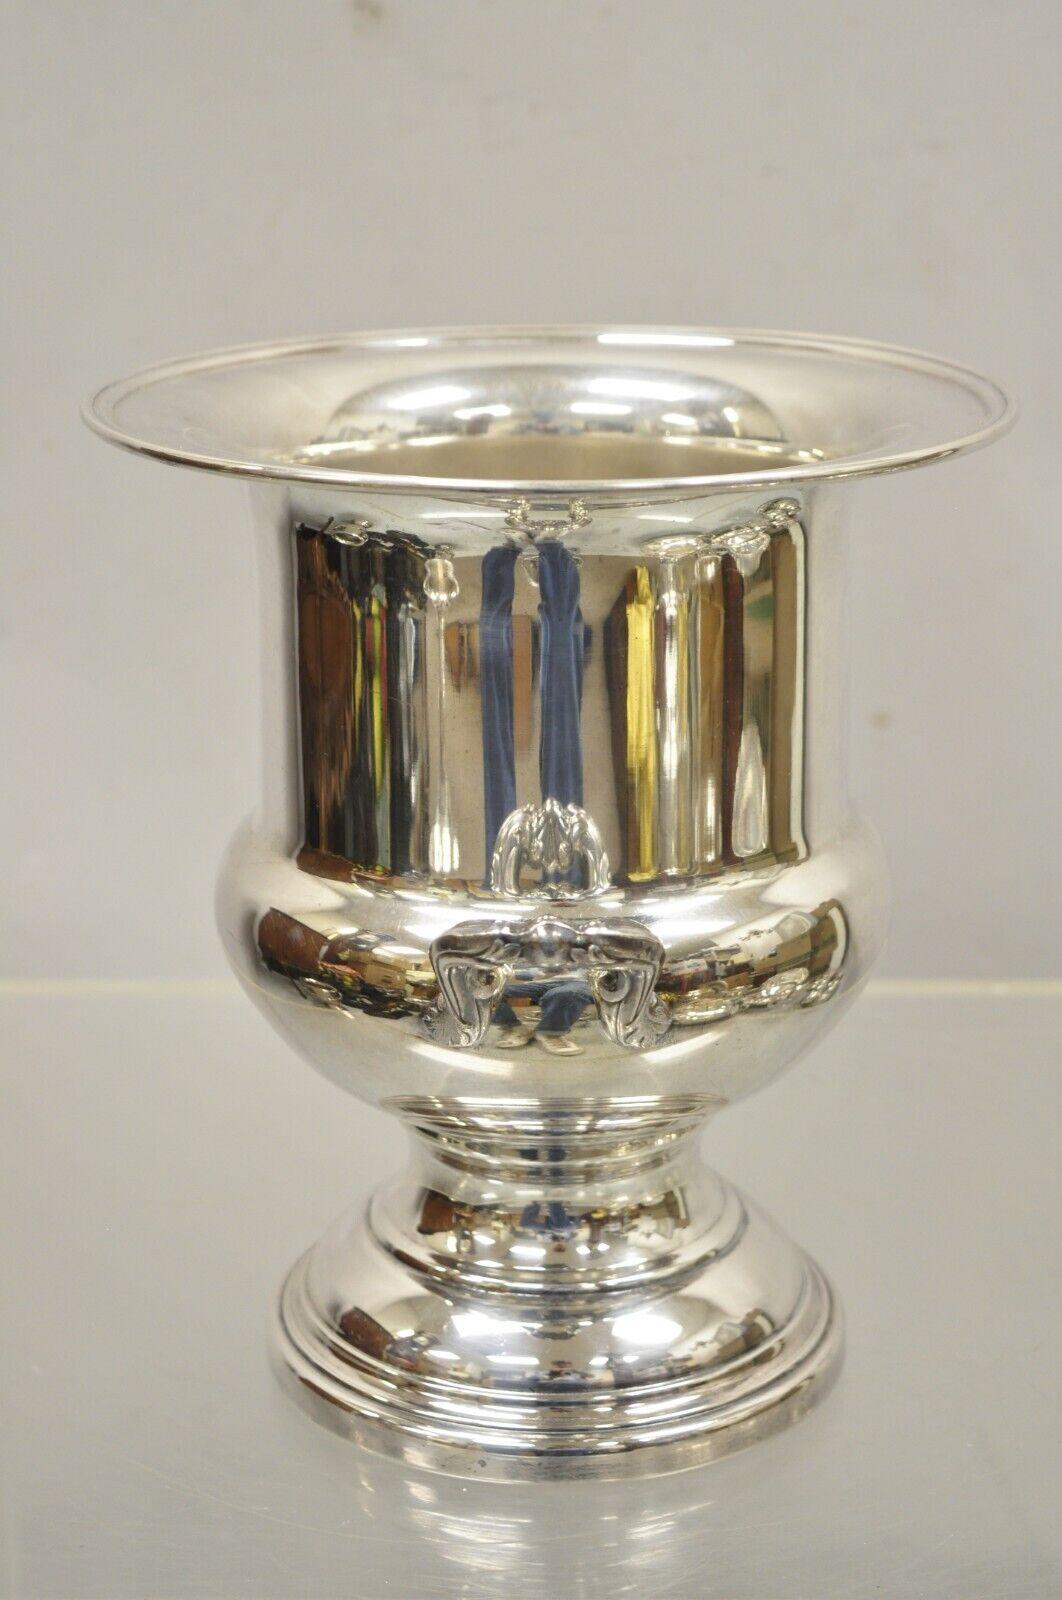 Vintage Oneida Silversmiths Trophy Cup Urn Champagne Bucket Ice Chiller.
Circa Mid to Late 20th Century. Measurements: 10